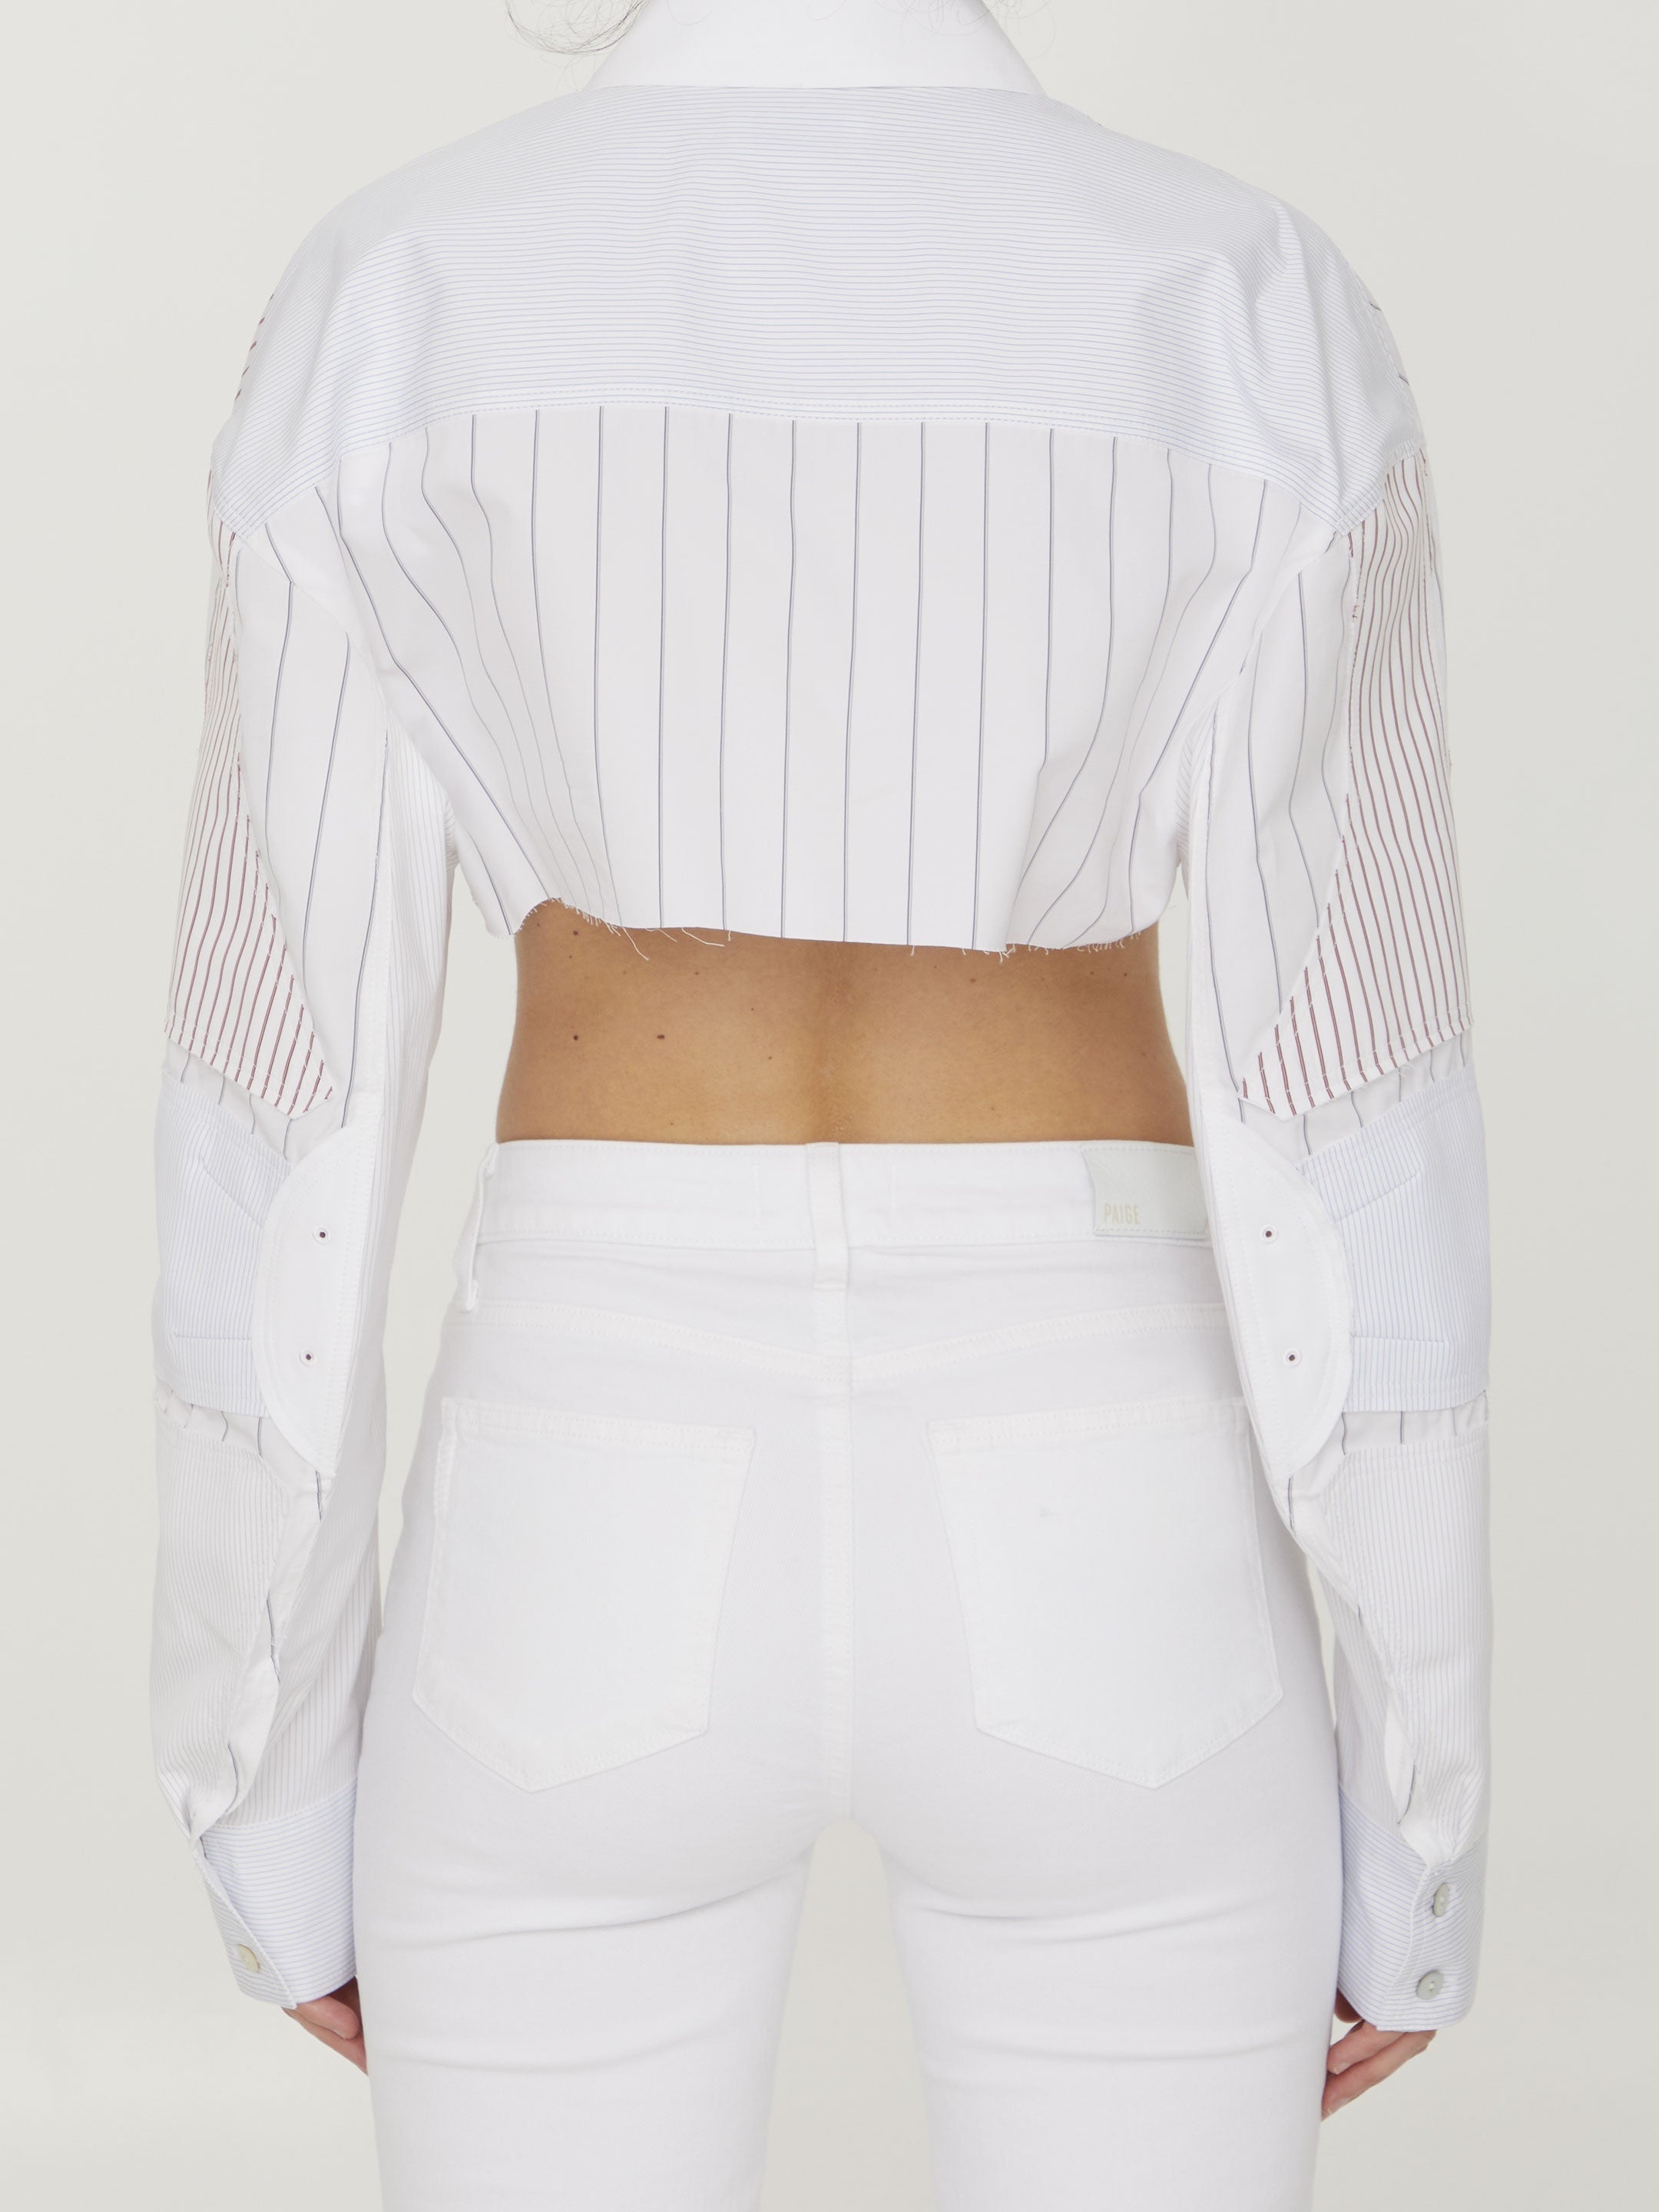 Cropped Motorcycle shirt